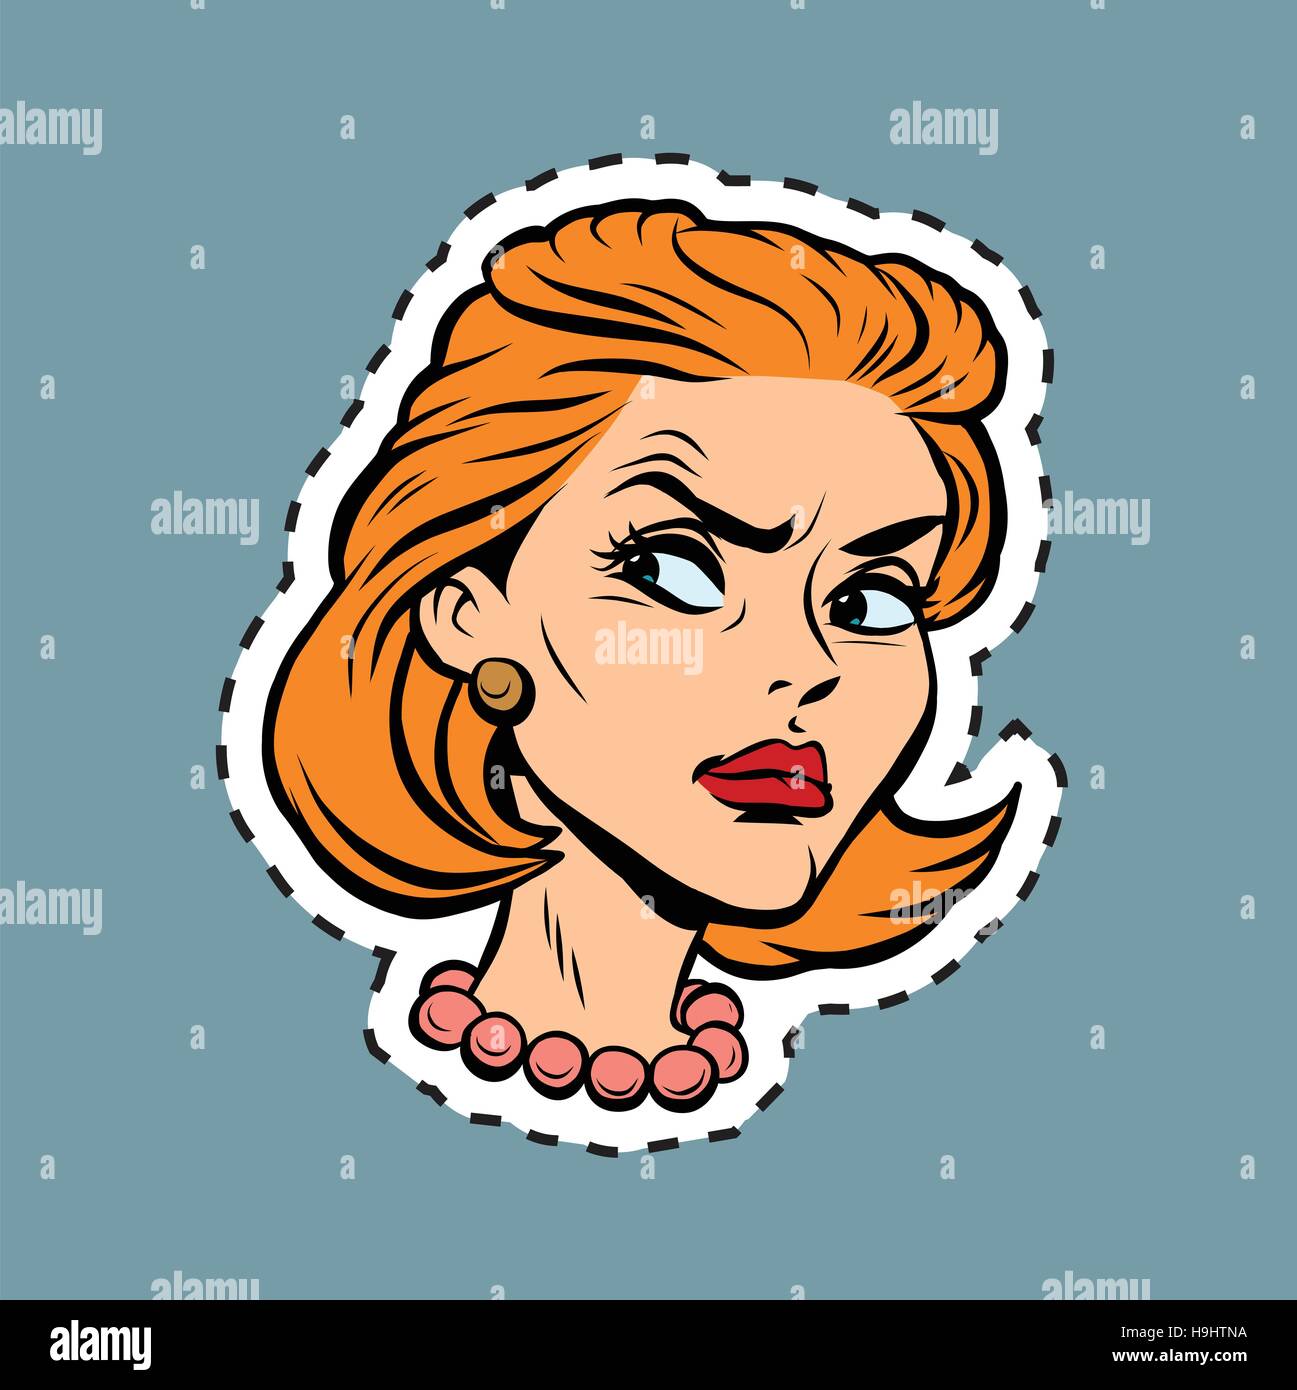 Angry girl face Emoji sticker label Stock Vector